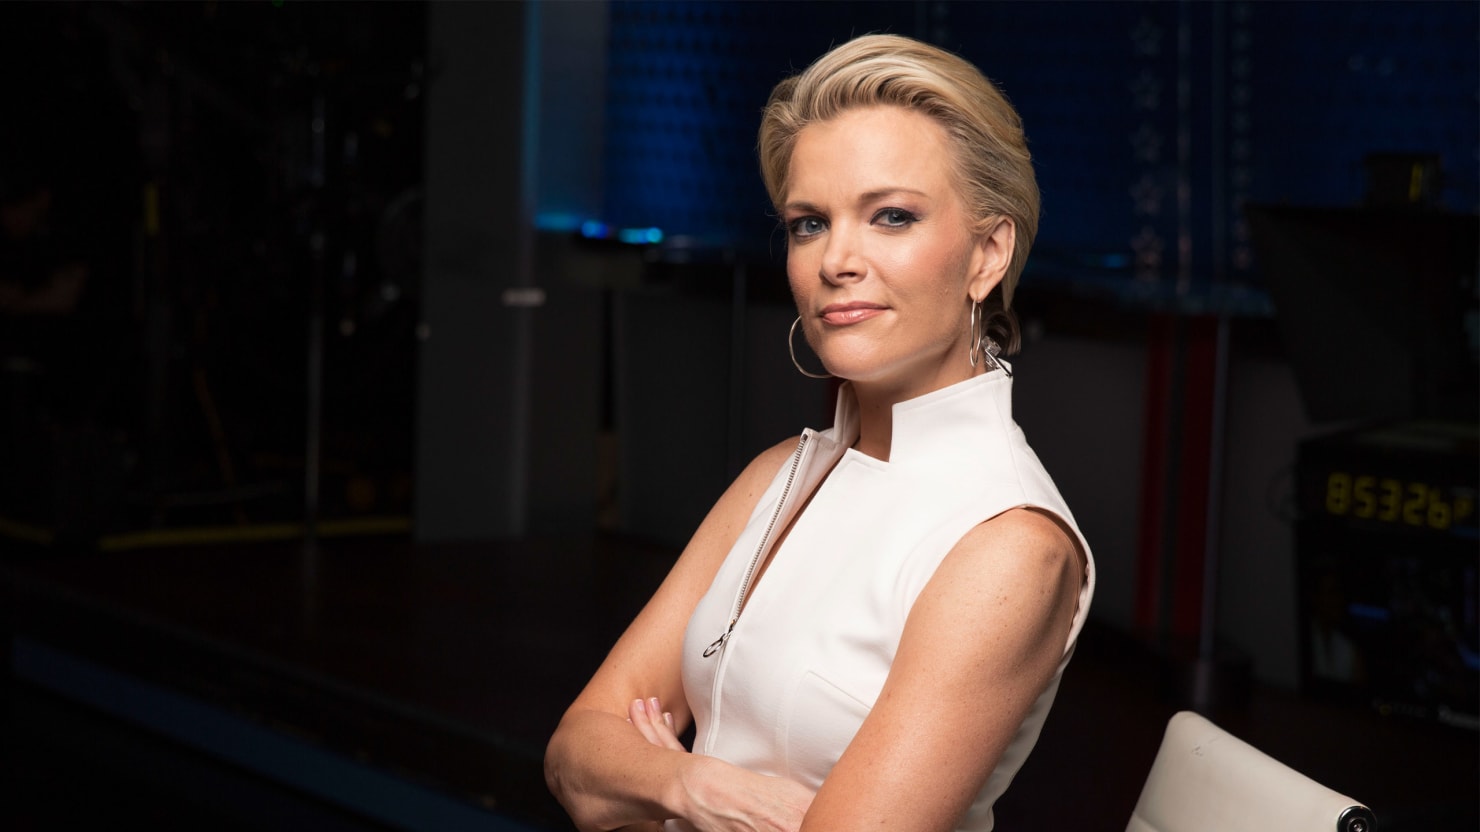 Will Megyn Kelly Survive The Perils Of Daytime TV